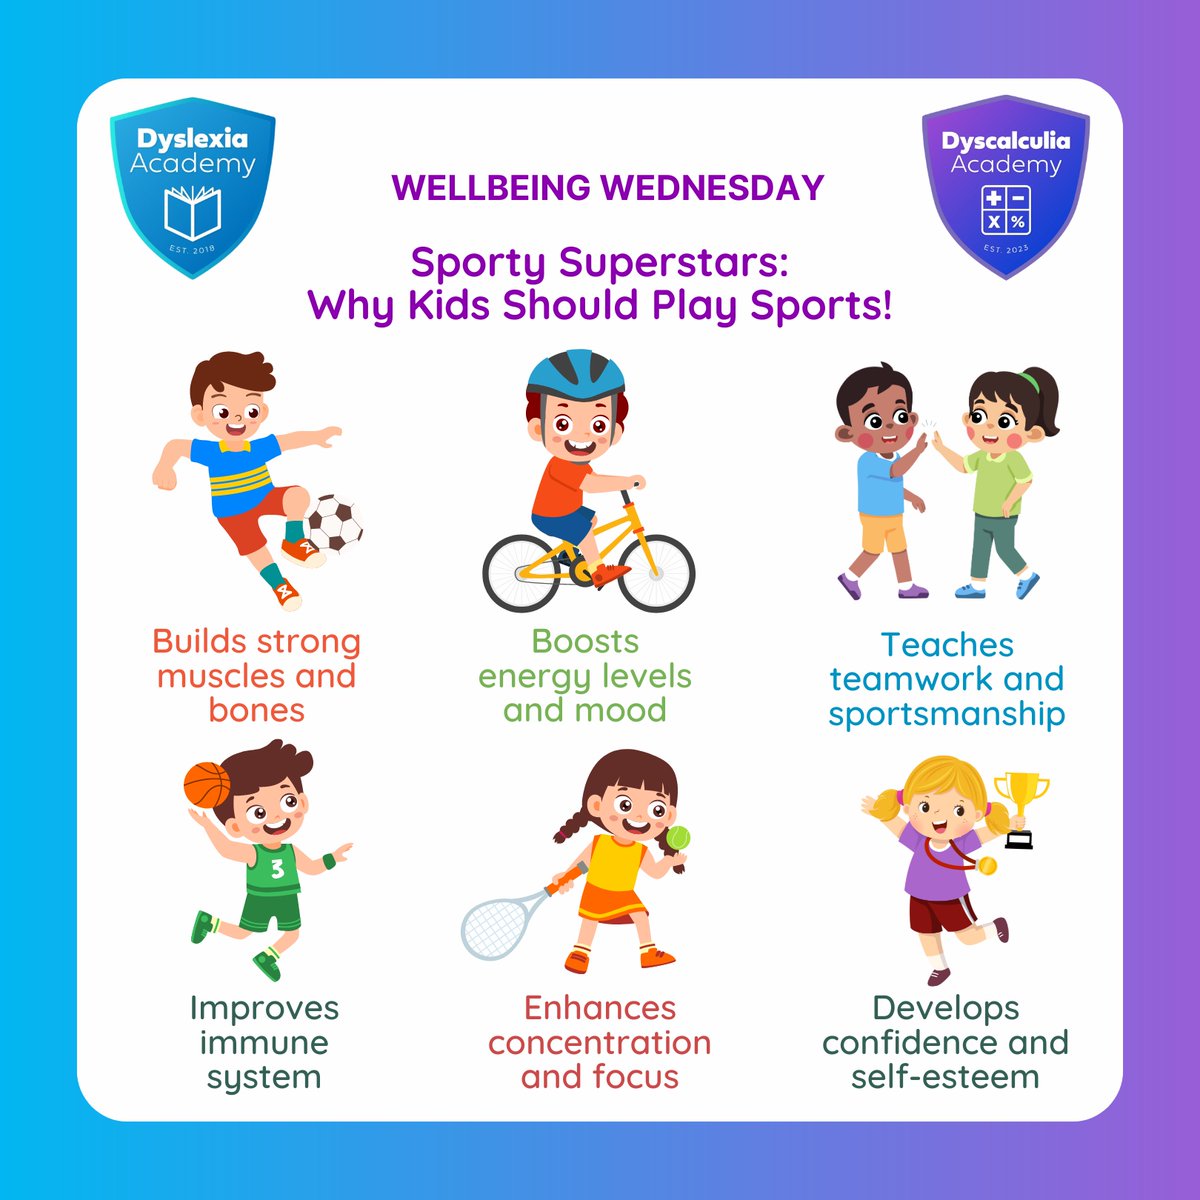 Dive into the world of sports and unlock a healthier, happier you!

From building strong muscles to boosting the immune system, sports are the ultimate game-changer for a lifetime of wellness!

Find out more here: dyslexia-academy.com

#dyslexiasupport #dyscalculia